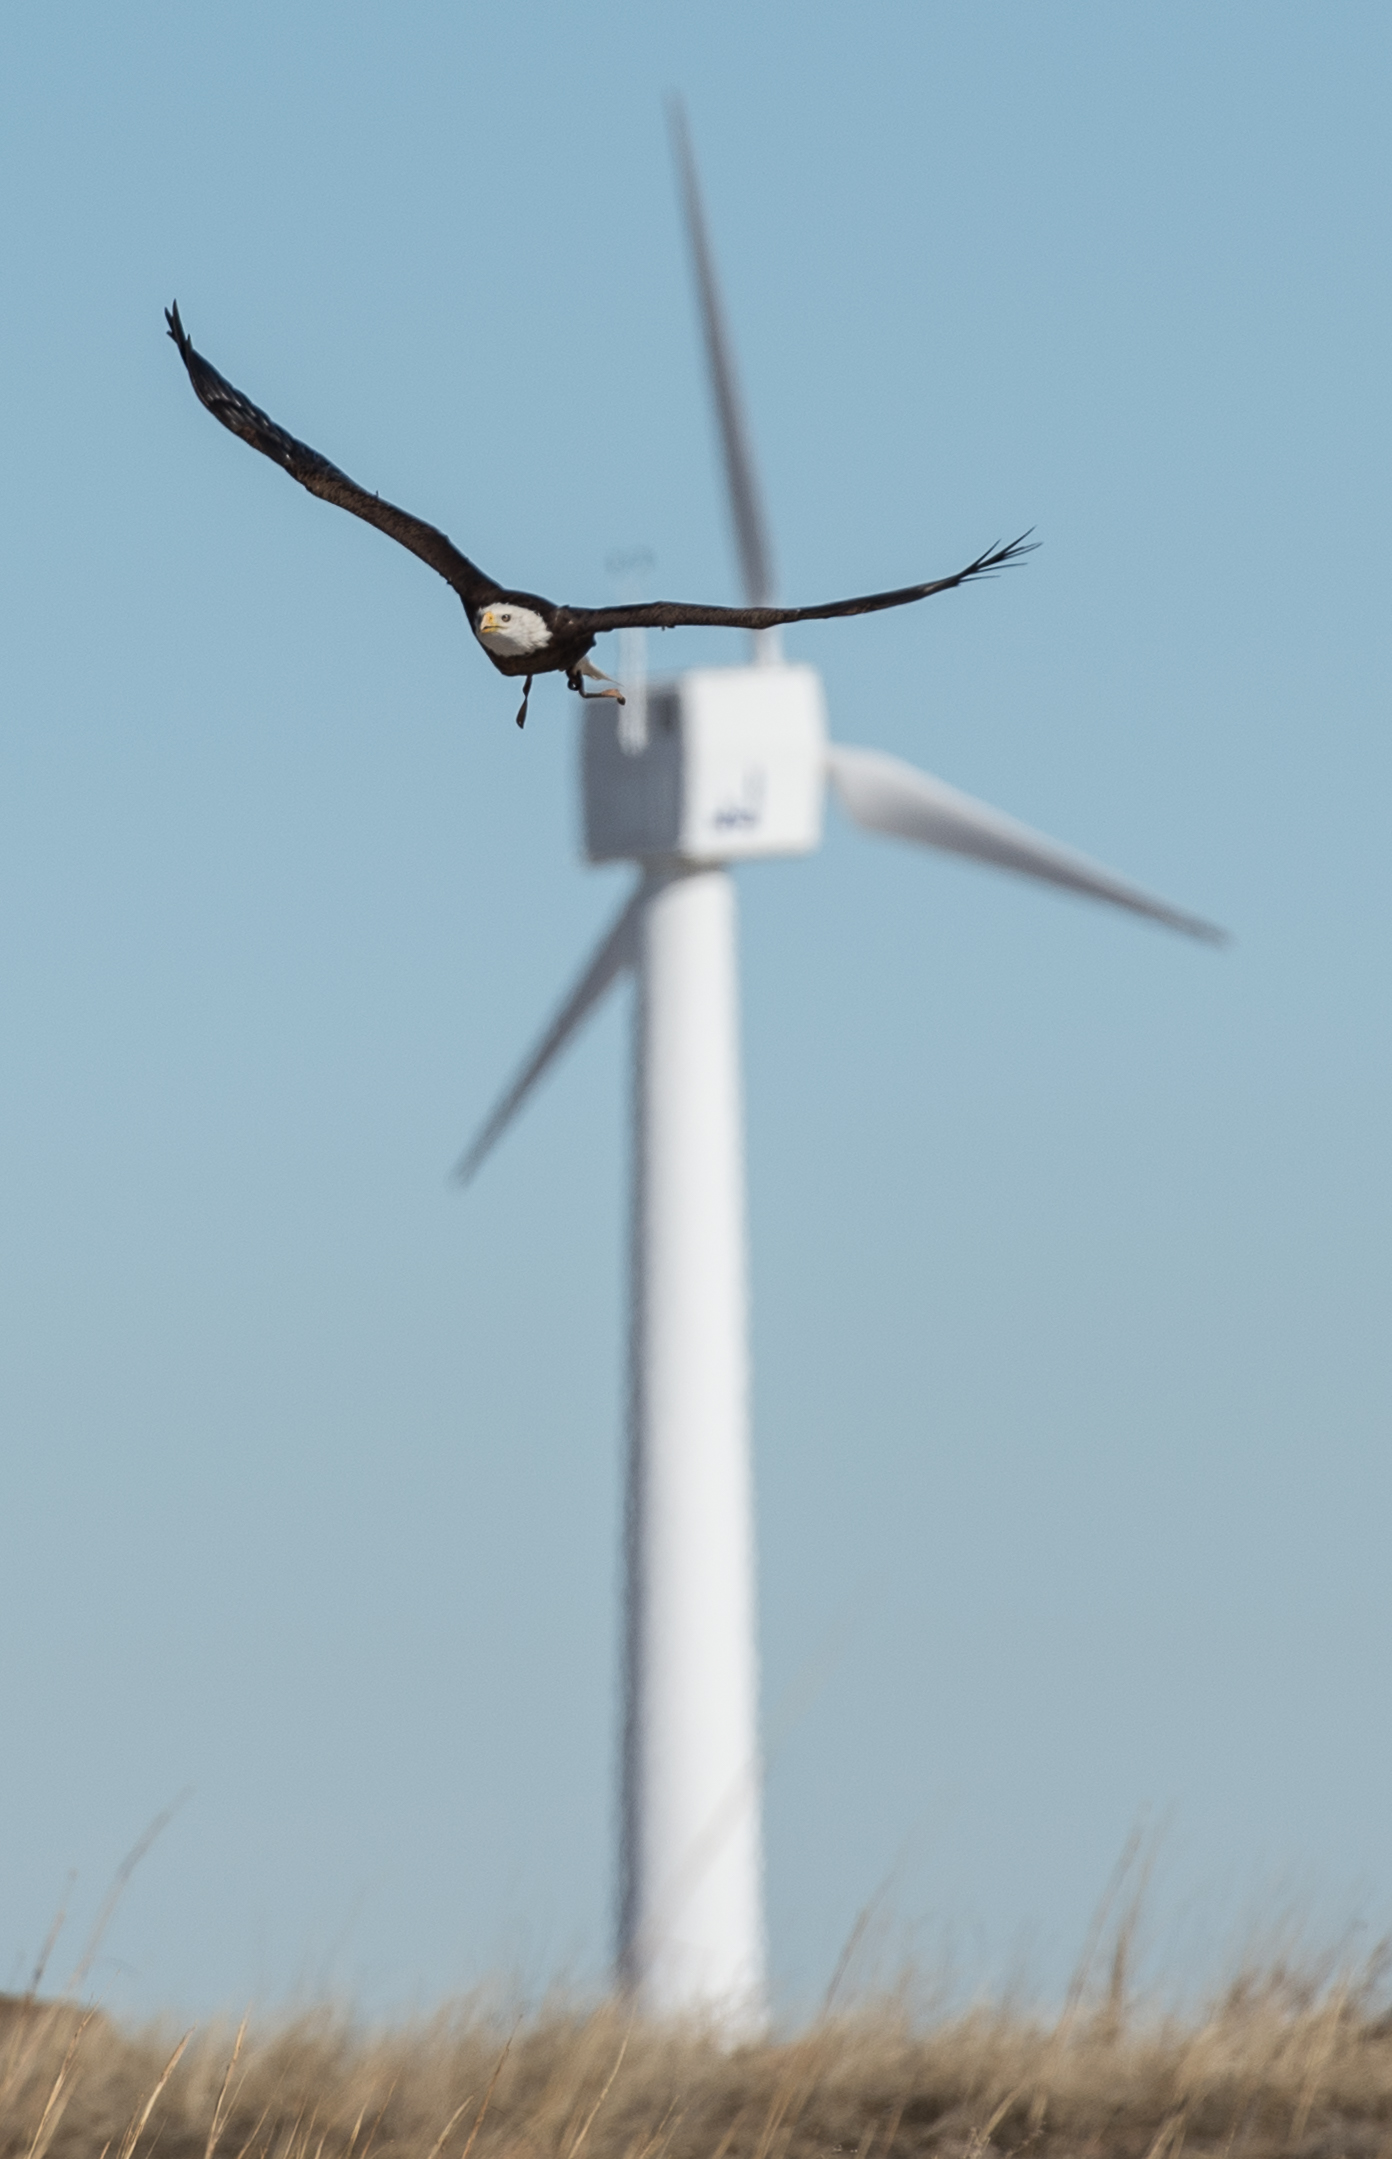 A bald eagle flying in front of a wind turbine over a grassy field